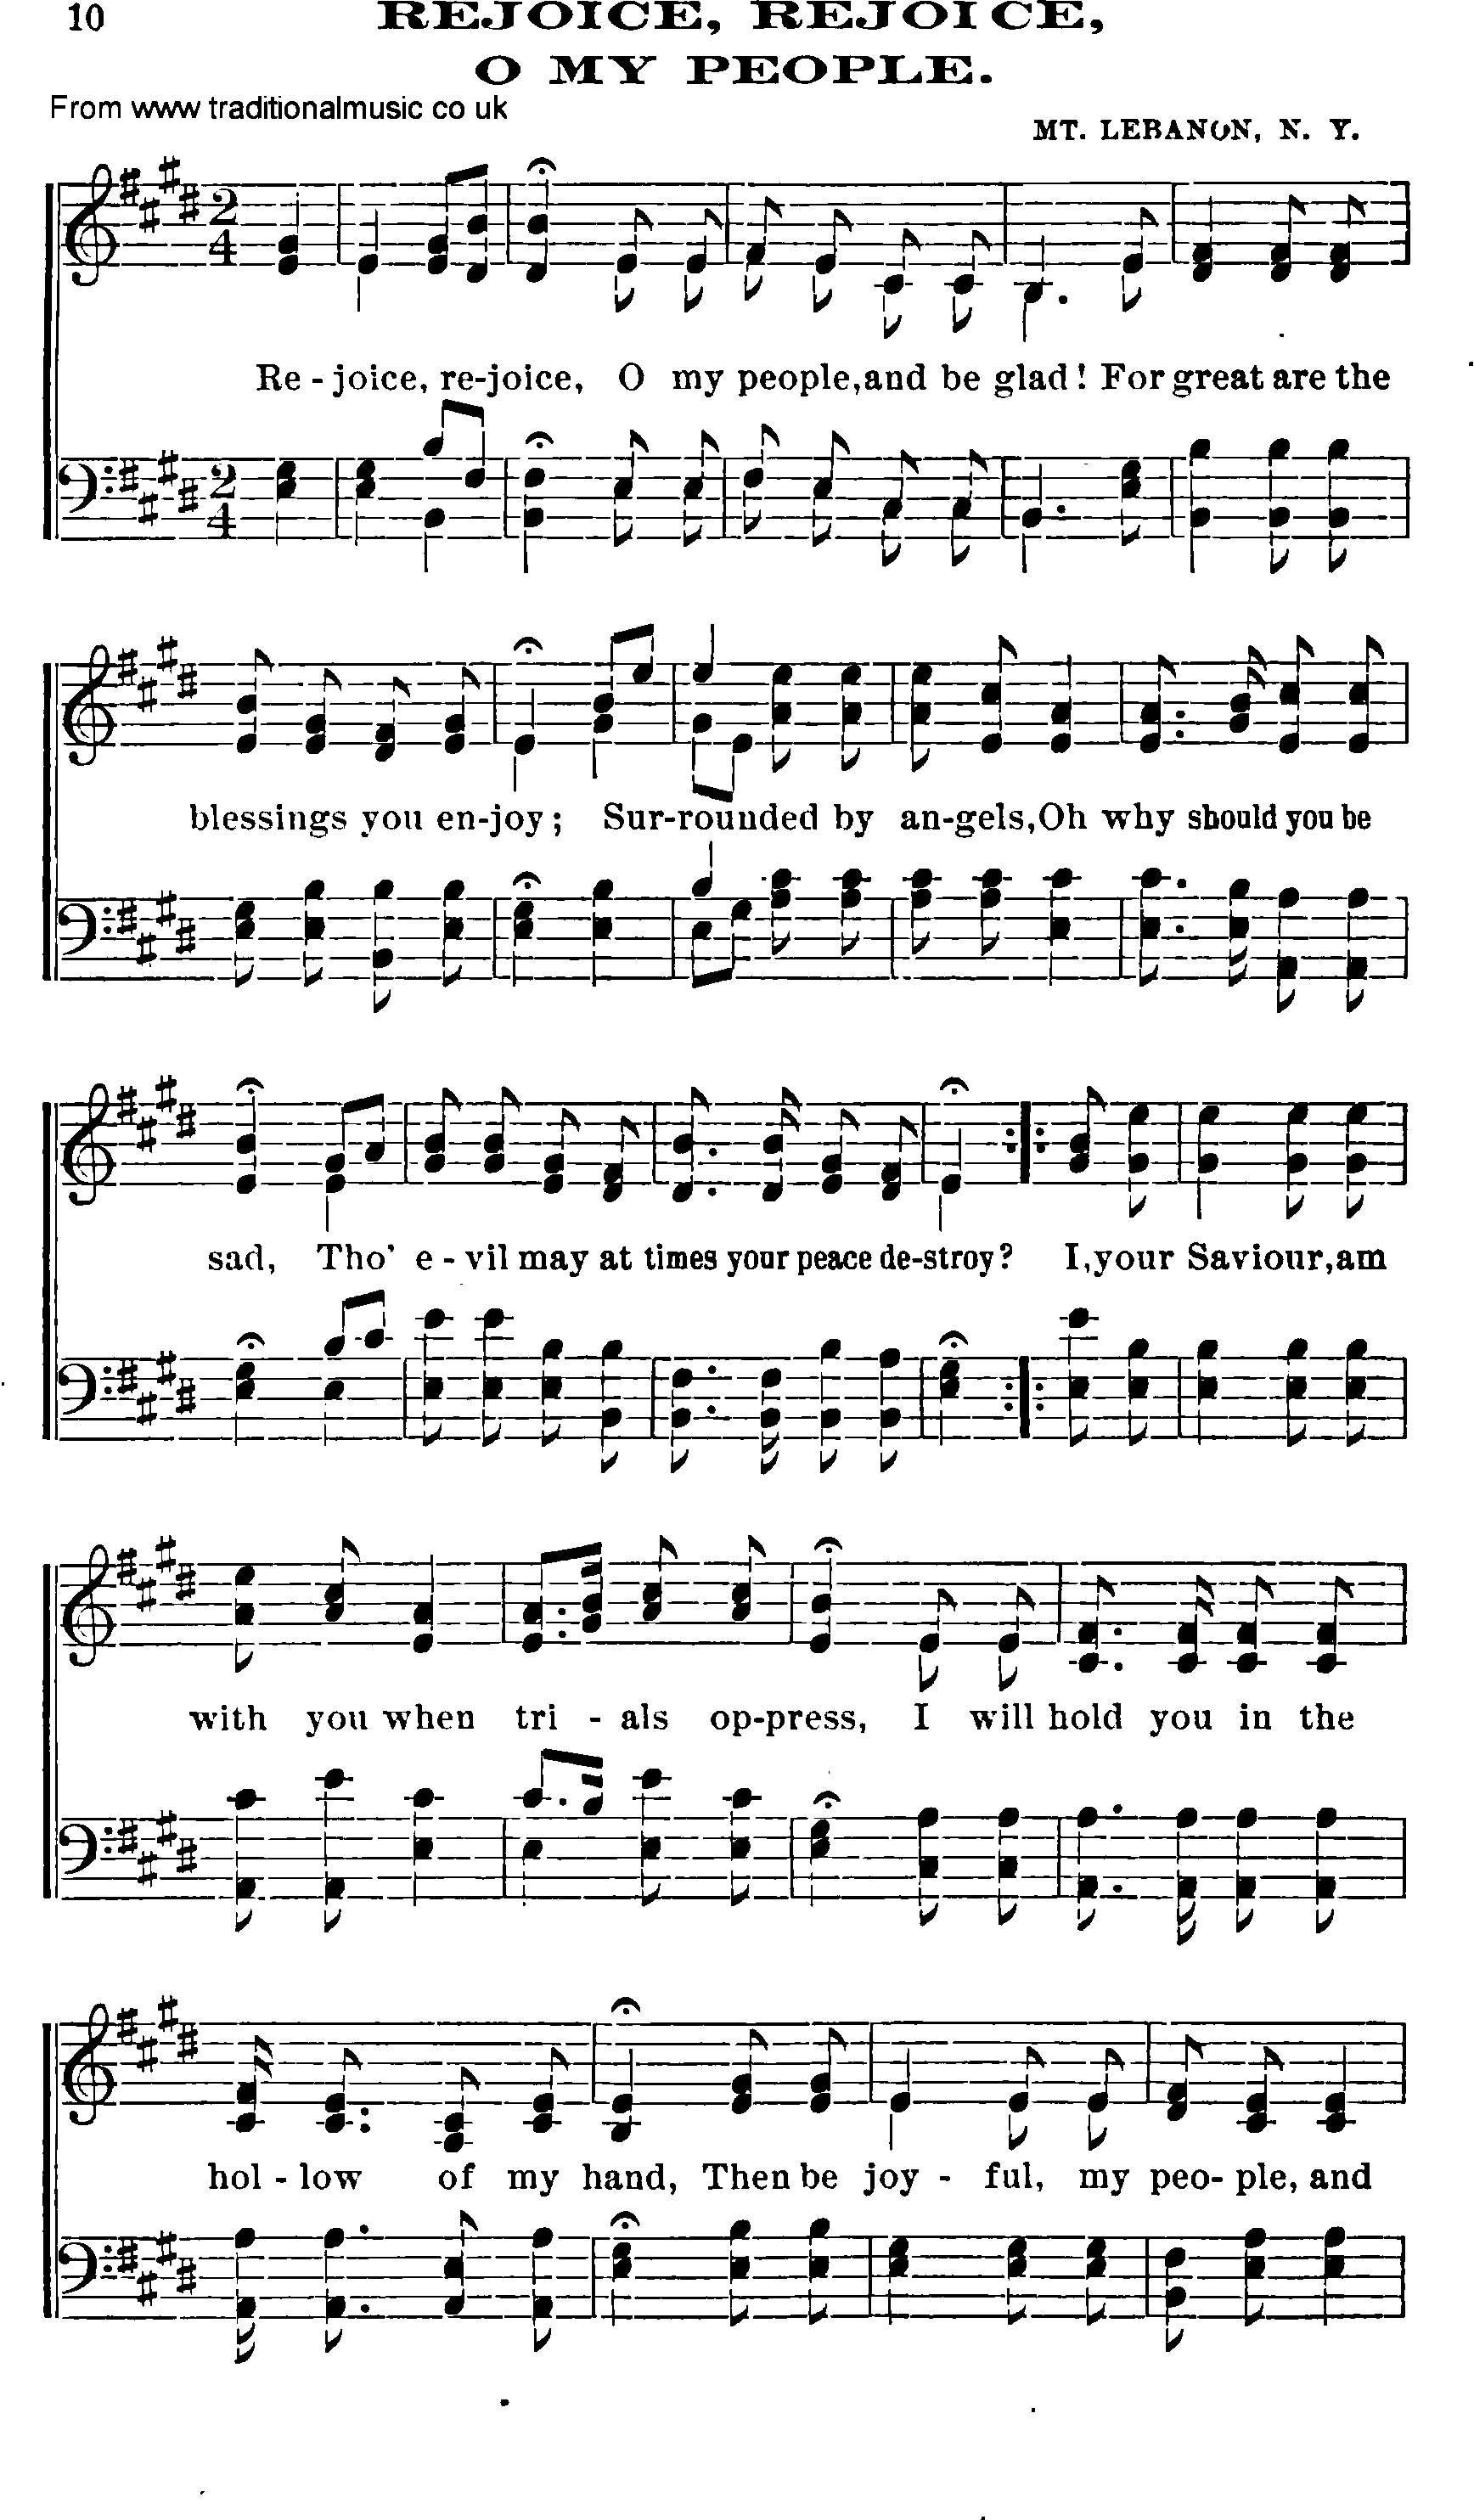 Shaker Music collection, Hymn: rejoice, rejoice o my people, sheetmusic and PDF